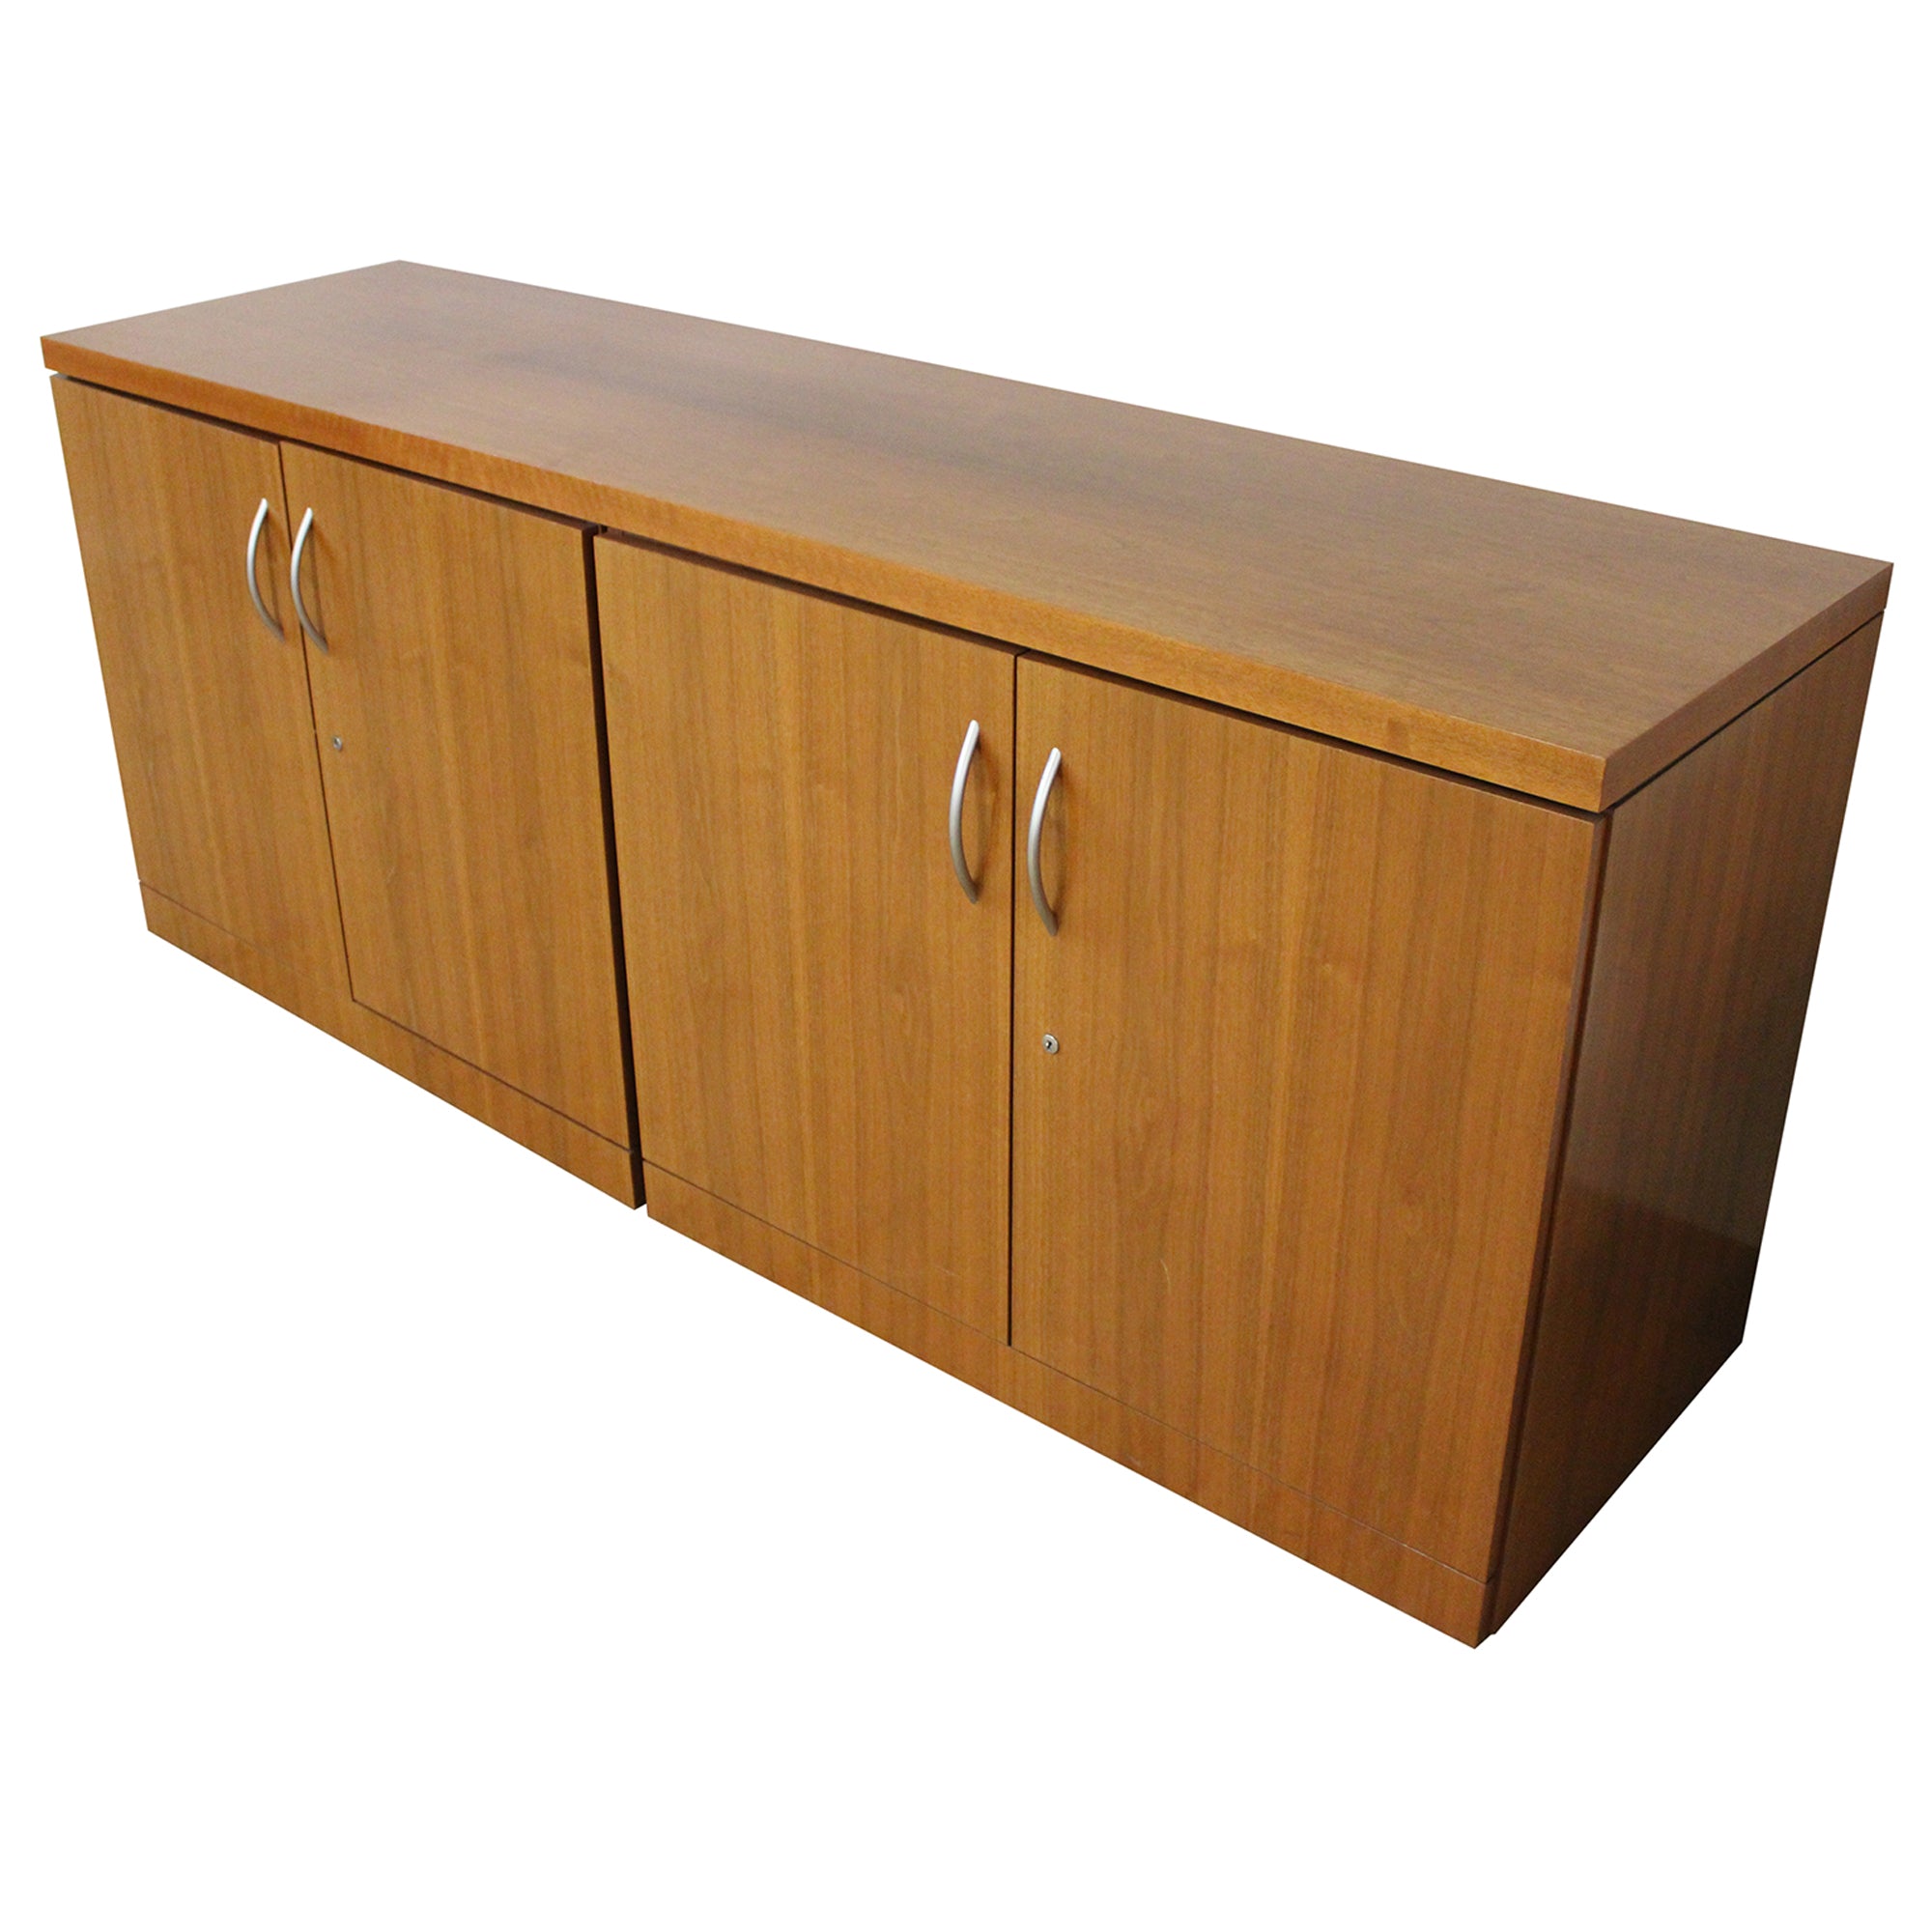 Geiger Credenza, Brown - Preowned